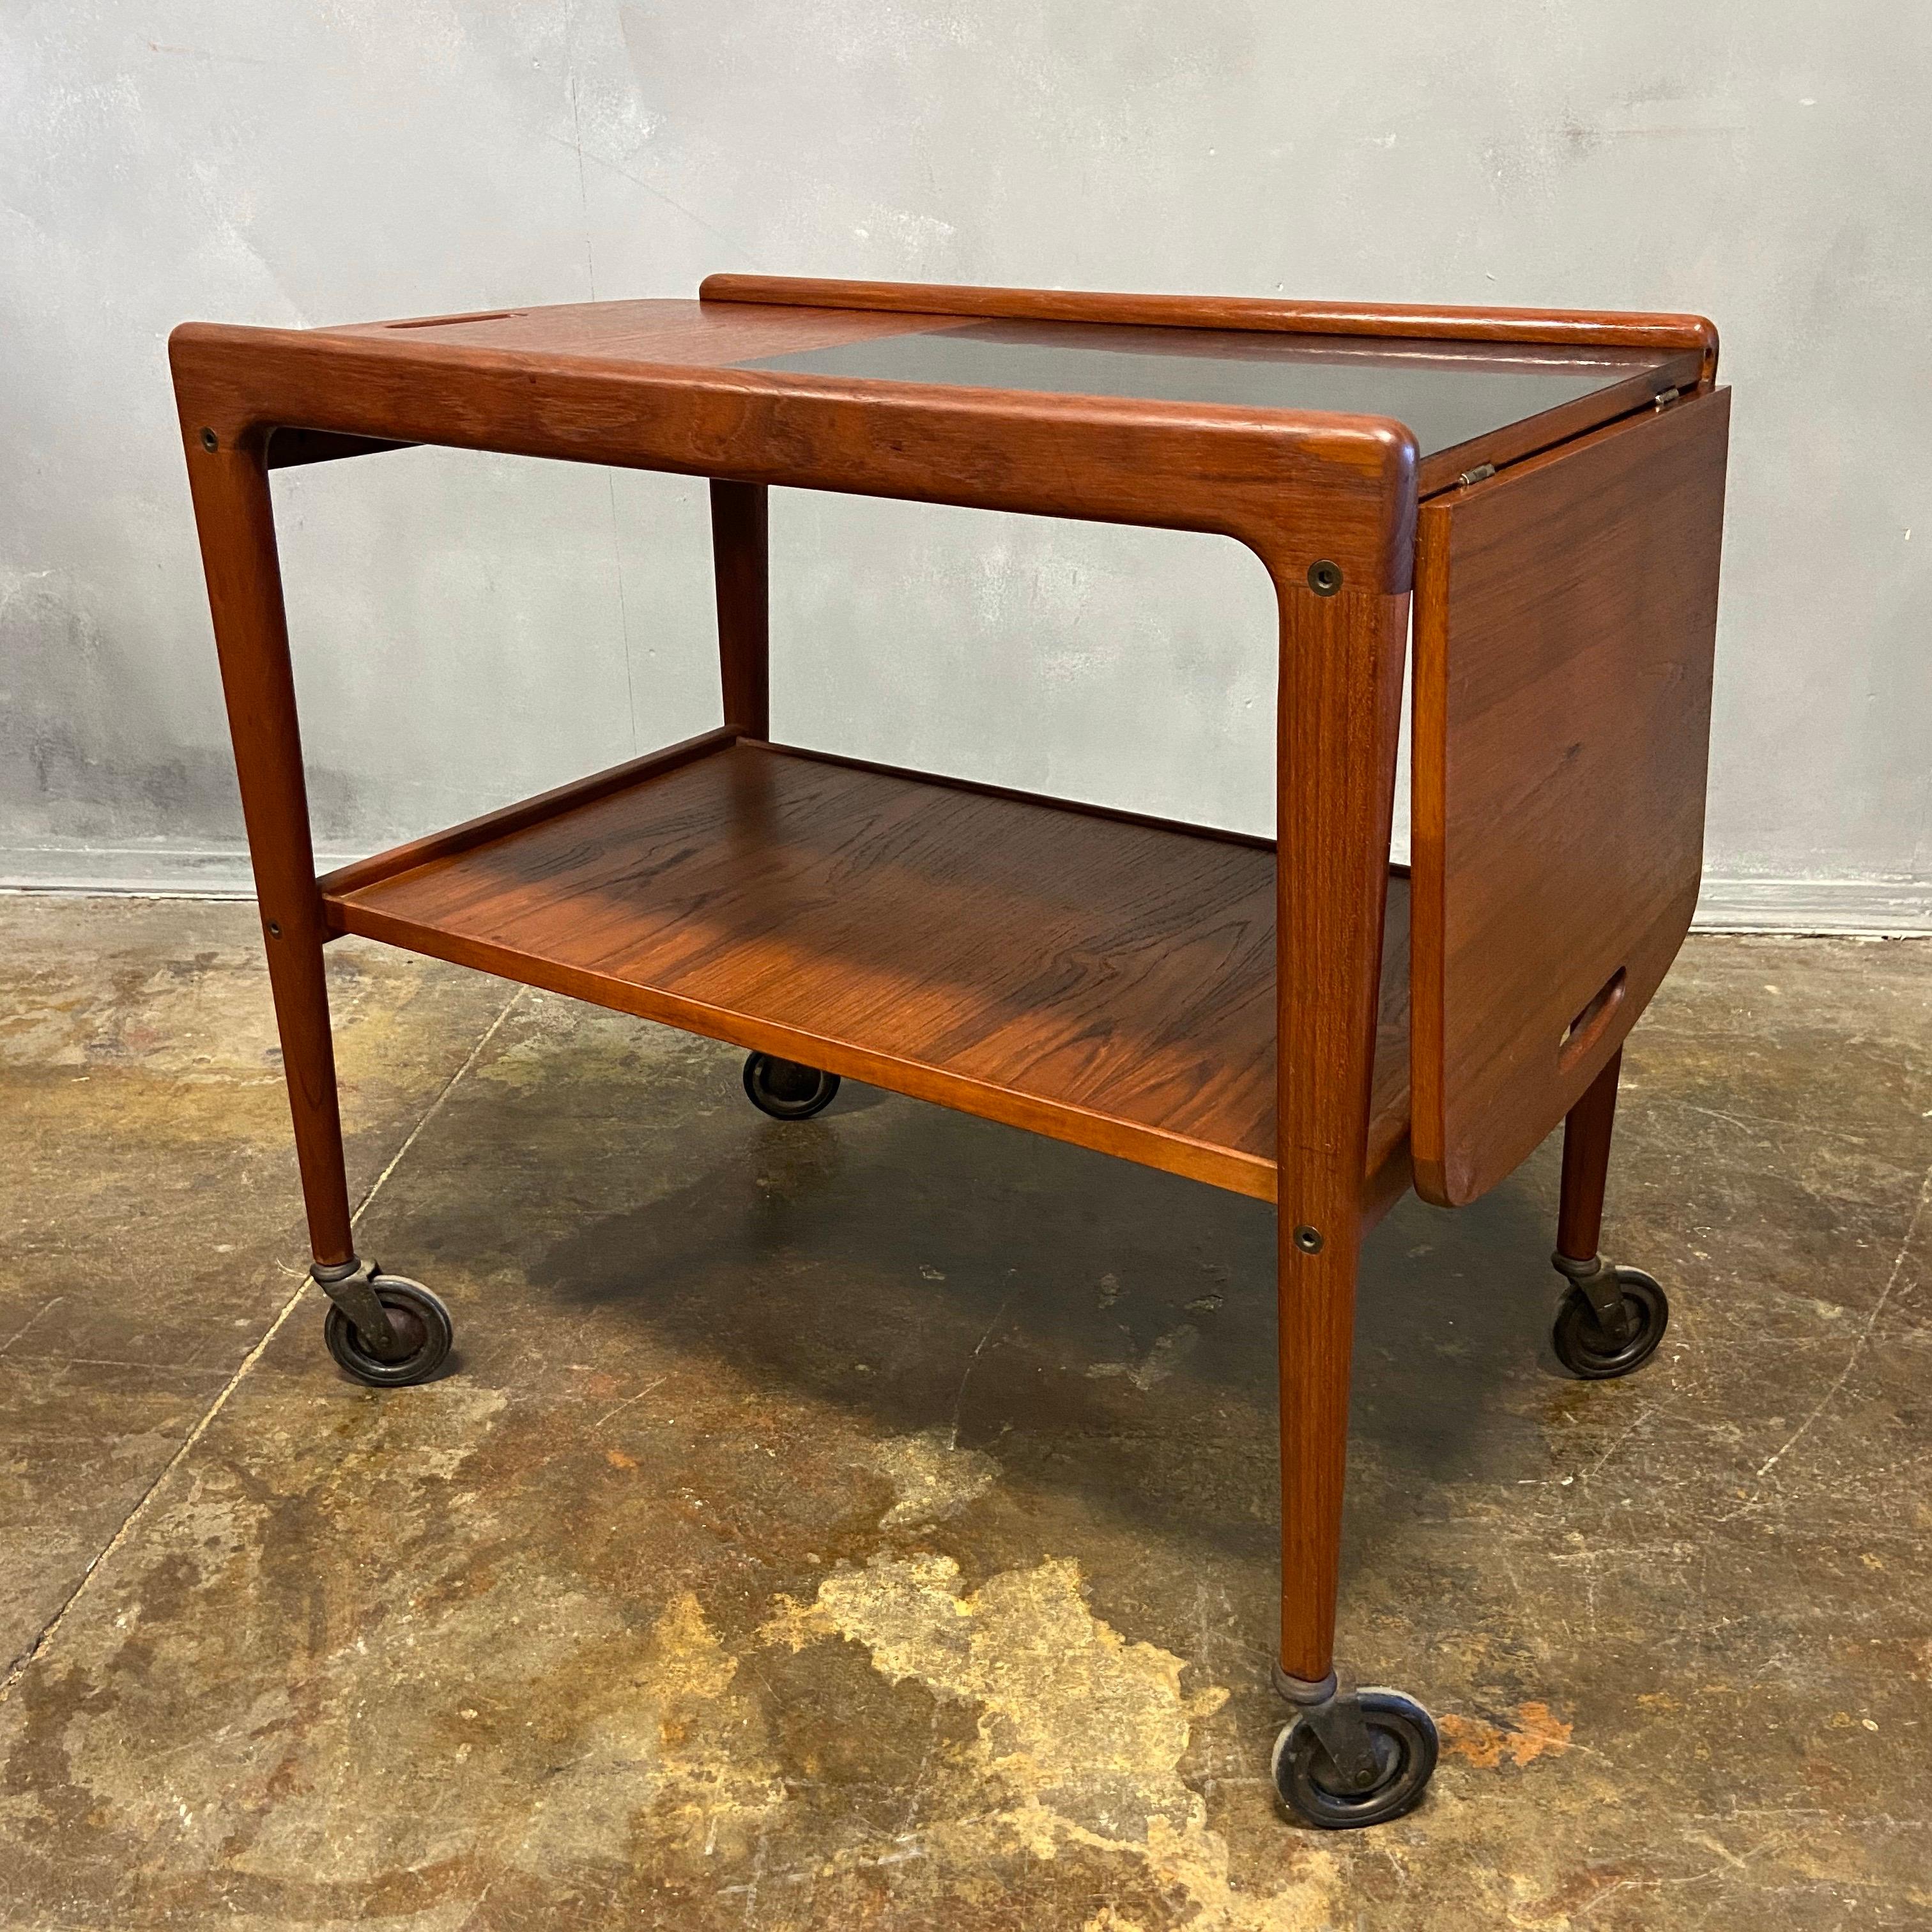 For your consideration is this wonderful Scandinavian Modern bar cart or server with a drop-leaf top by Yngeve Ekstrom. Made of teak wood with sculptural handles on either side. The total height is 25 inches and the height of the shelf is 12 1/2